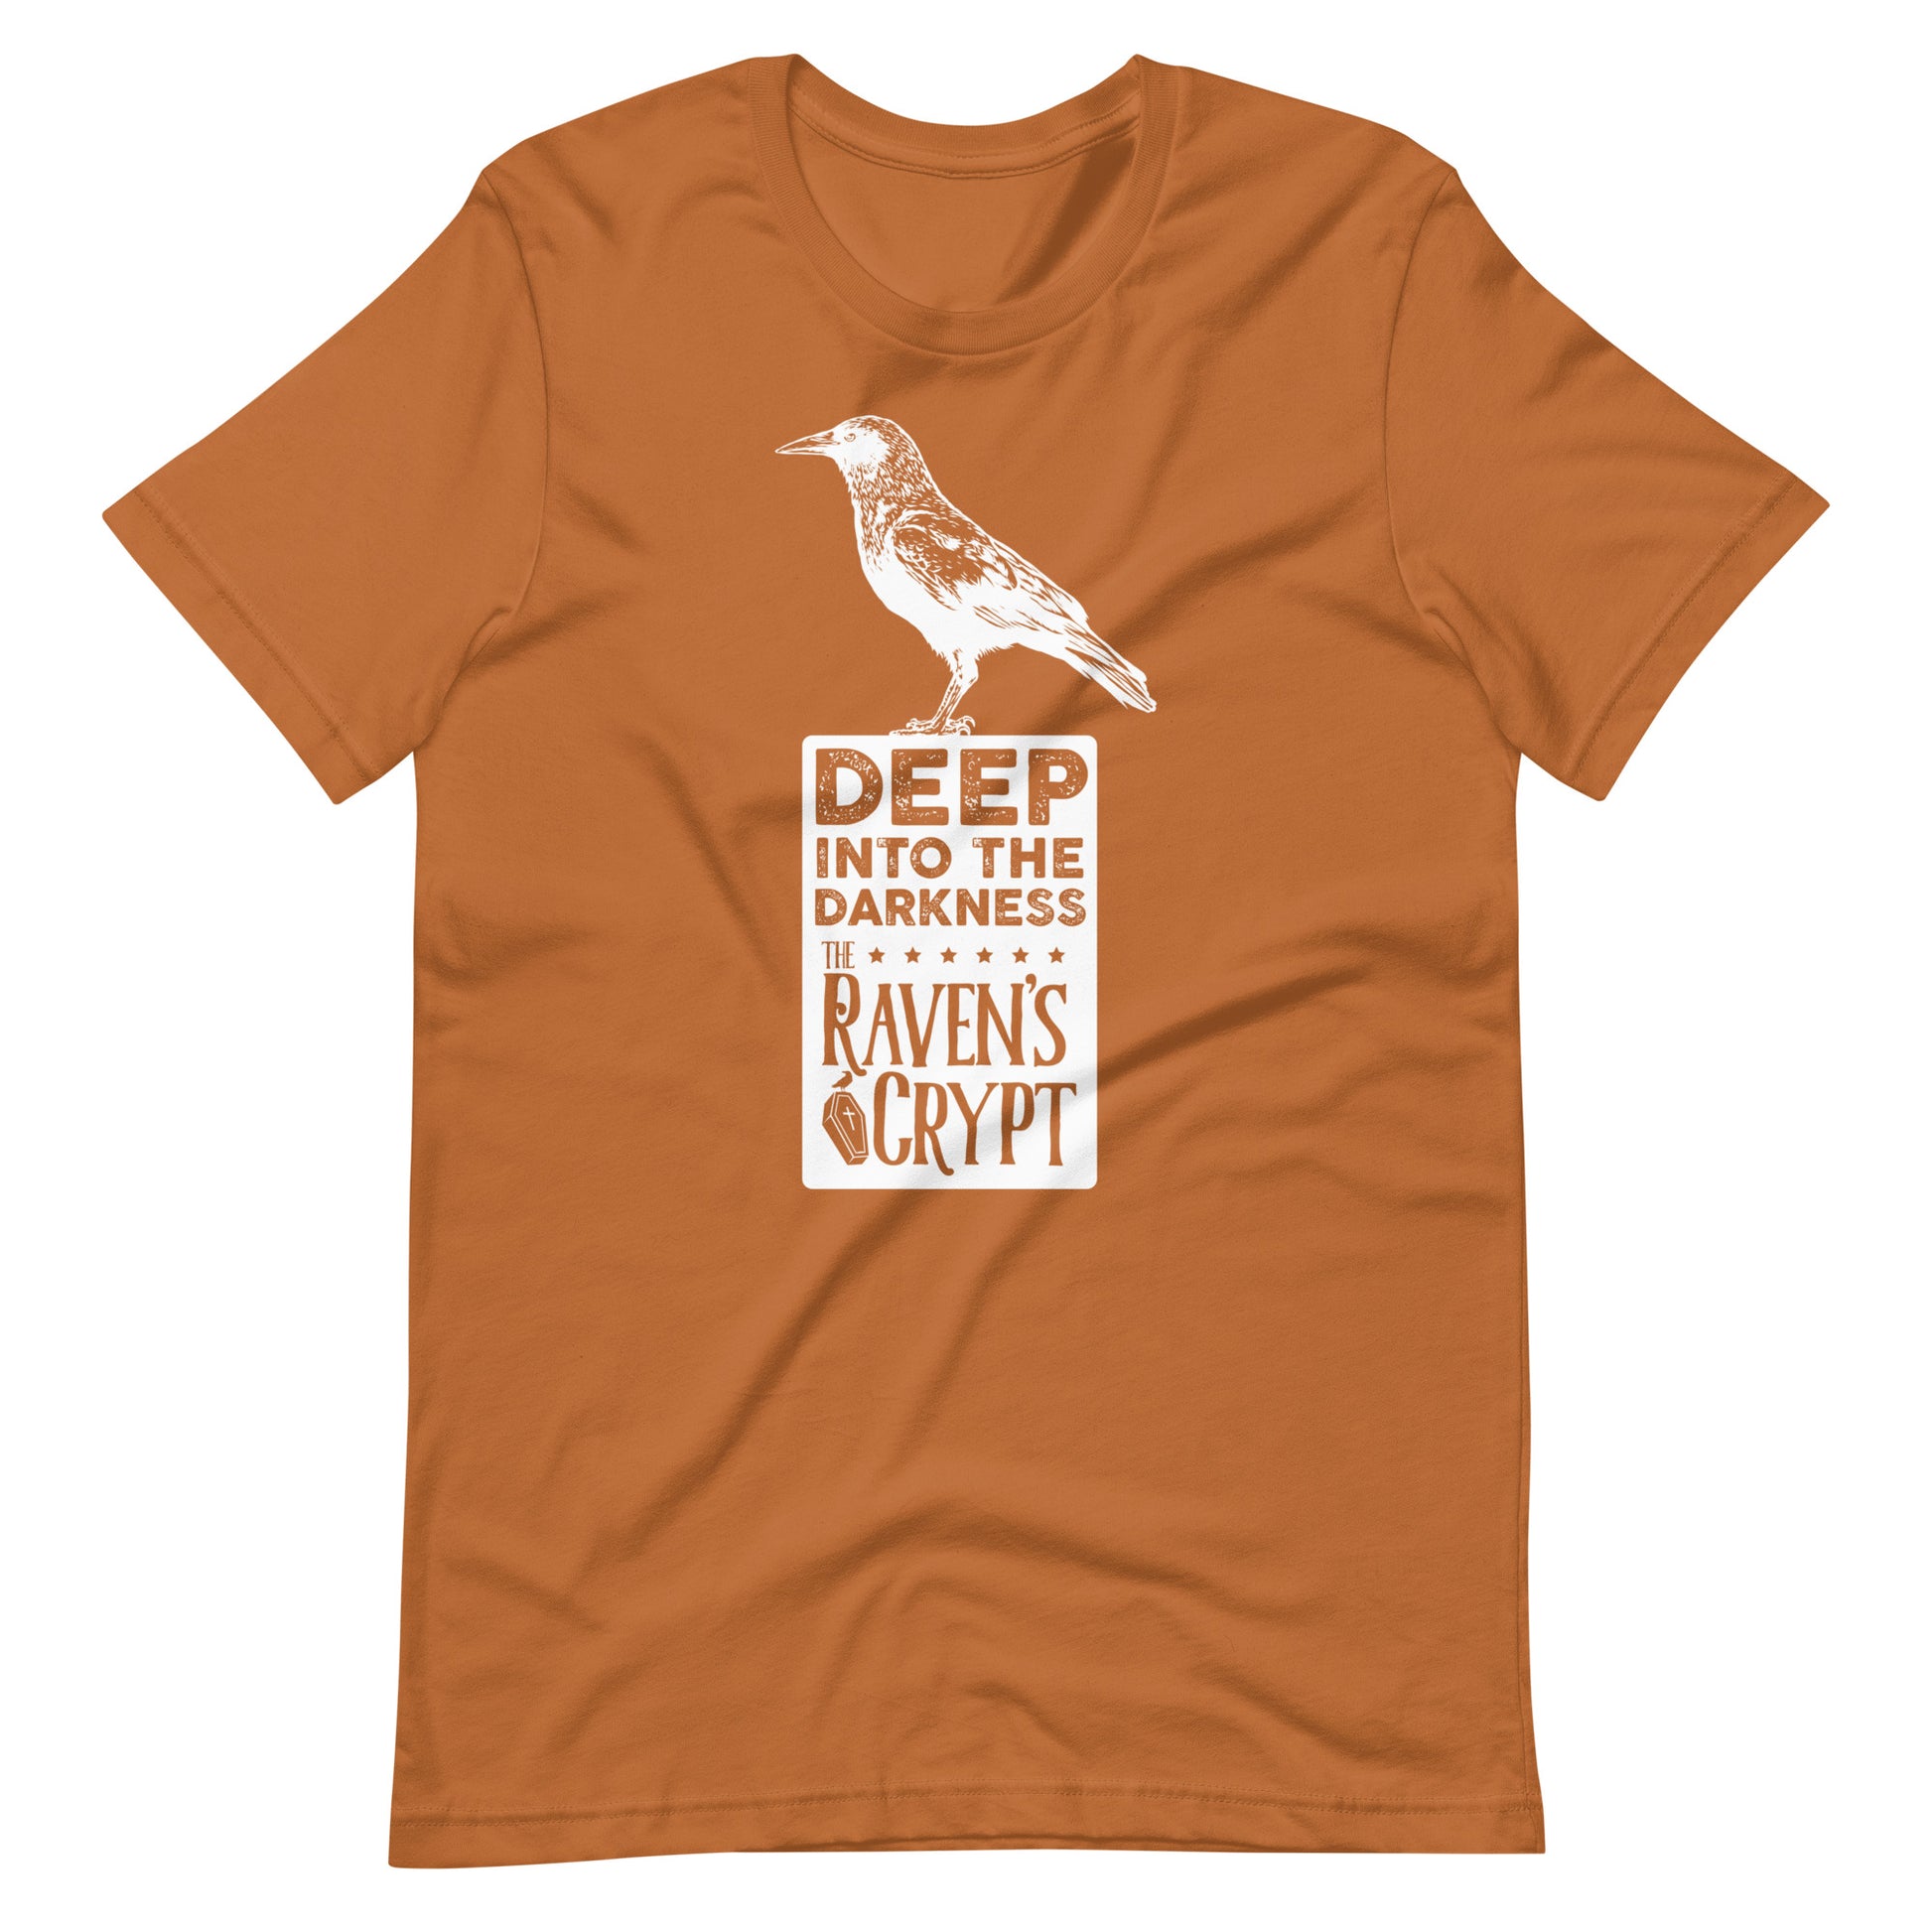 Deep Into the Darkness Crypt 2 - Men's t-shirt - Toast Front